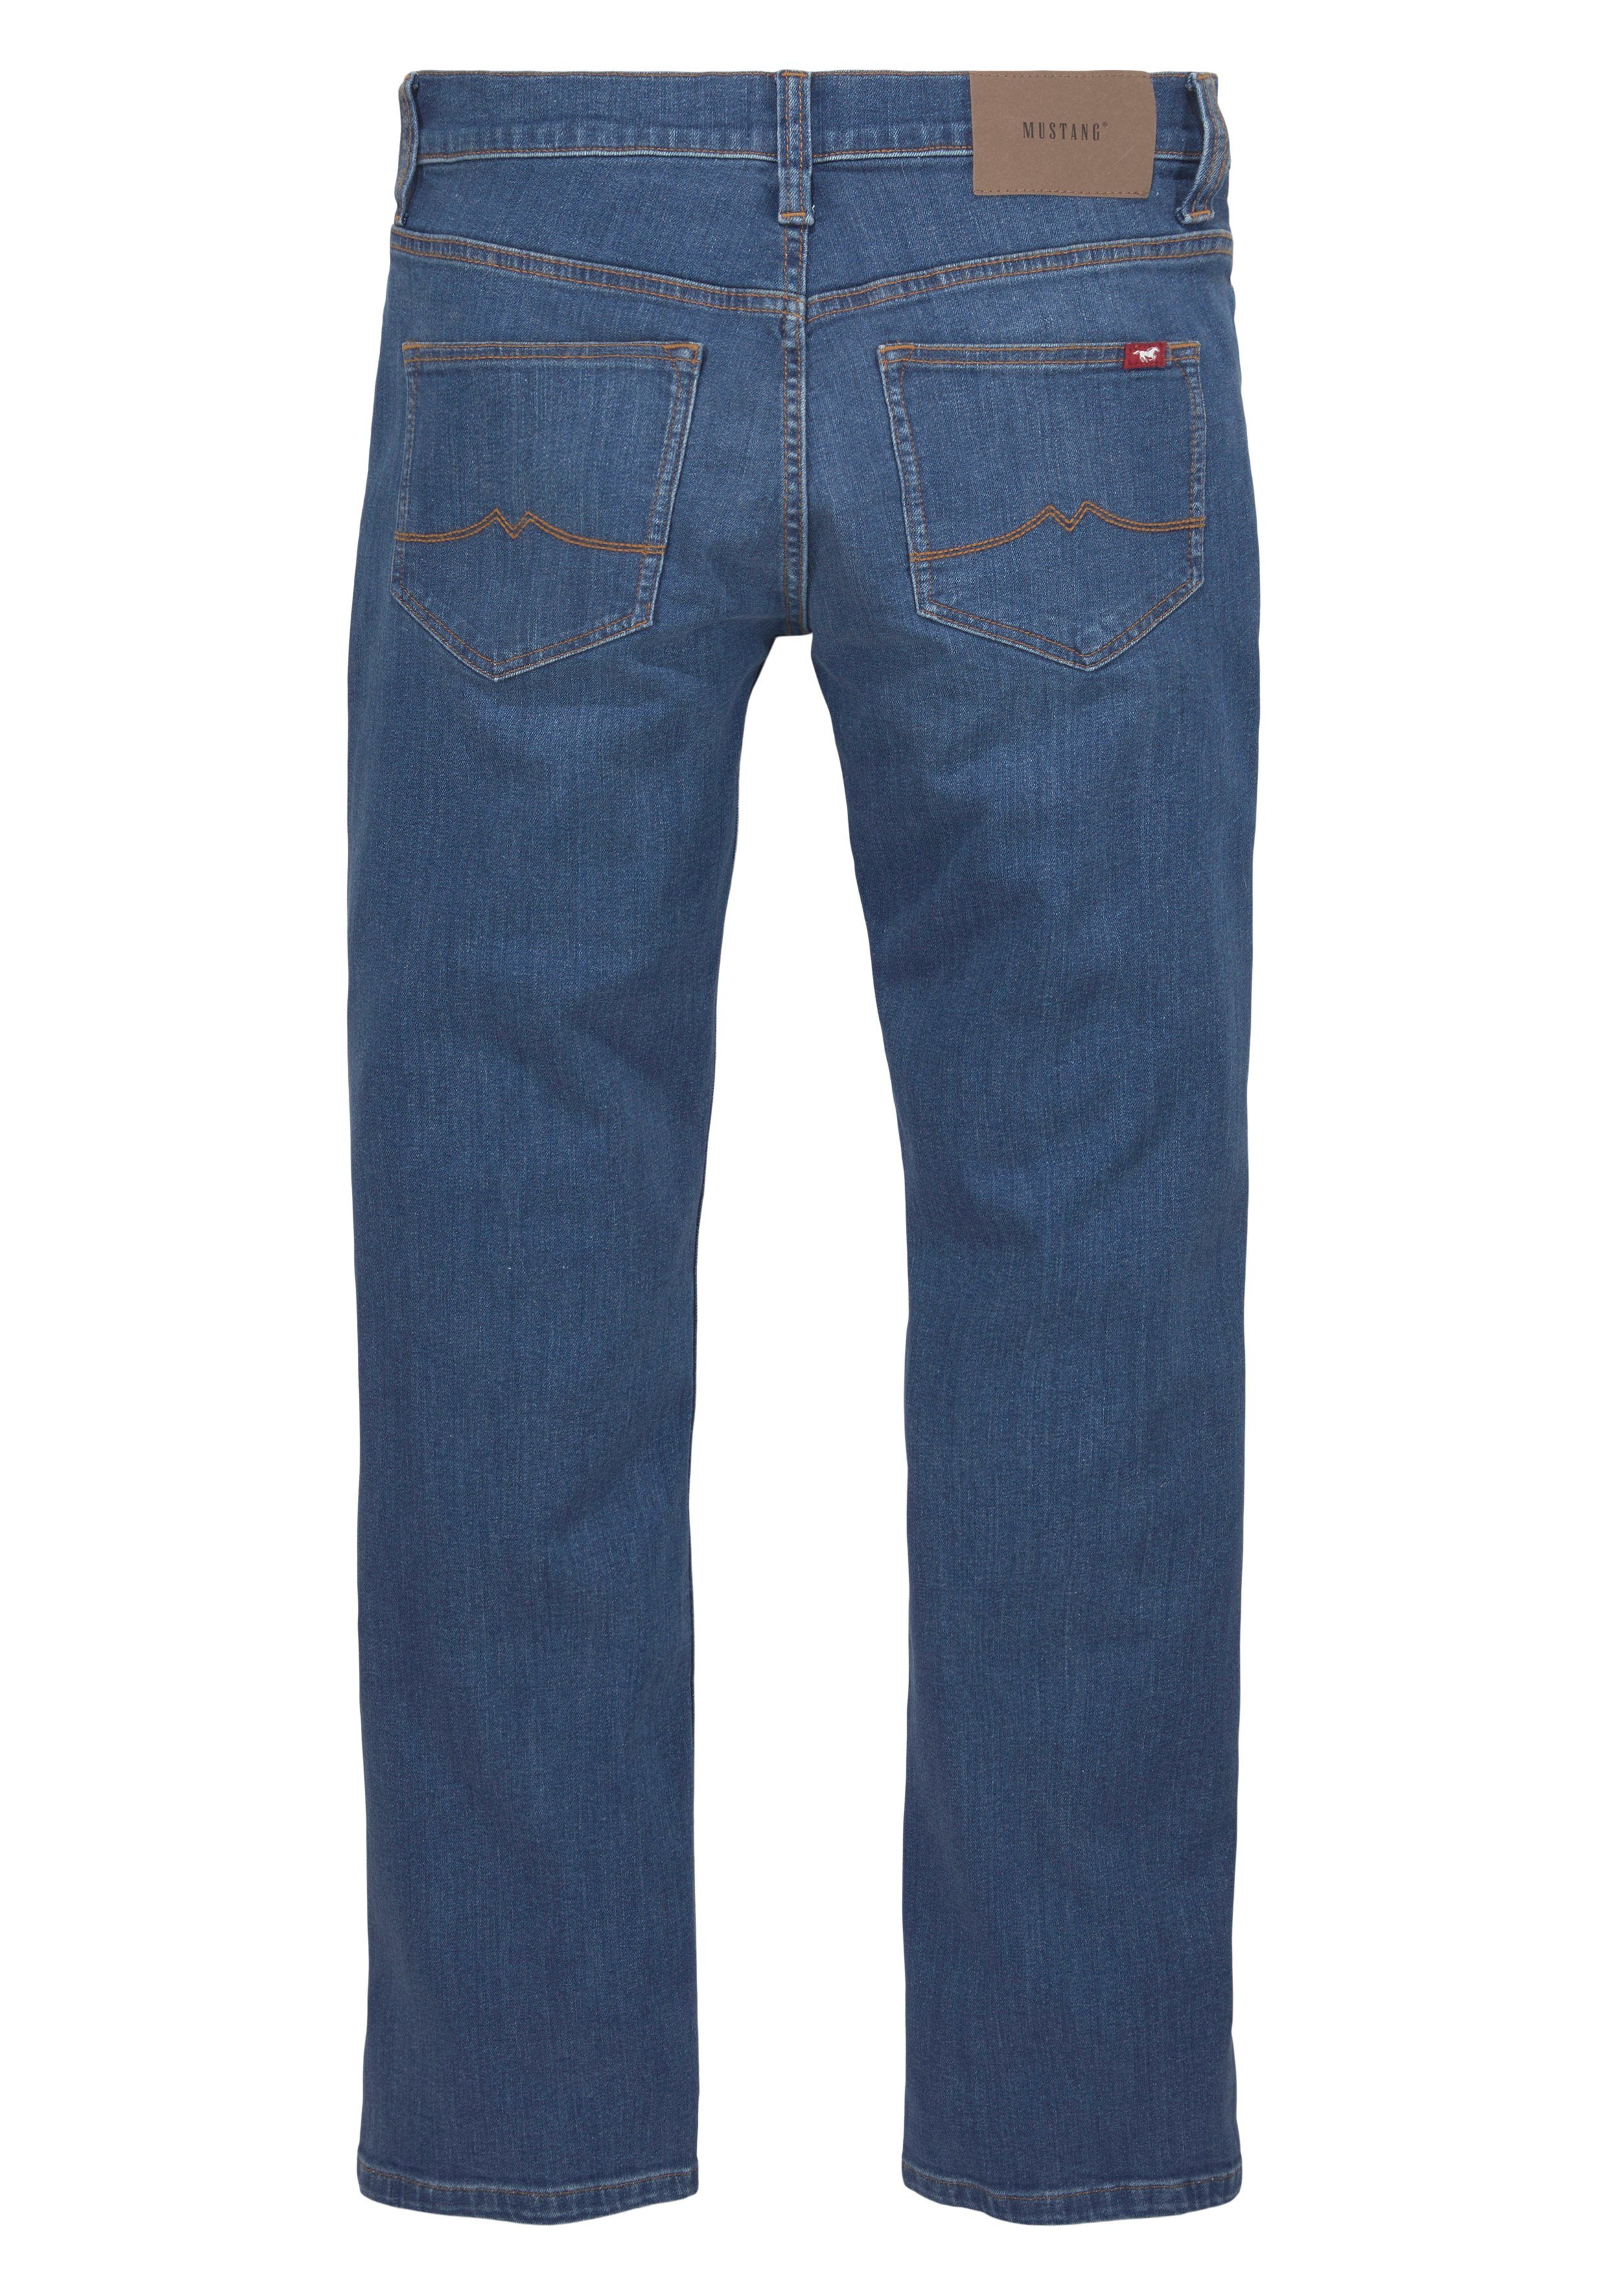 MUSTANG Bootcut-Jeans STYLE OREGON dark blue wash BOOTCUT